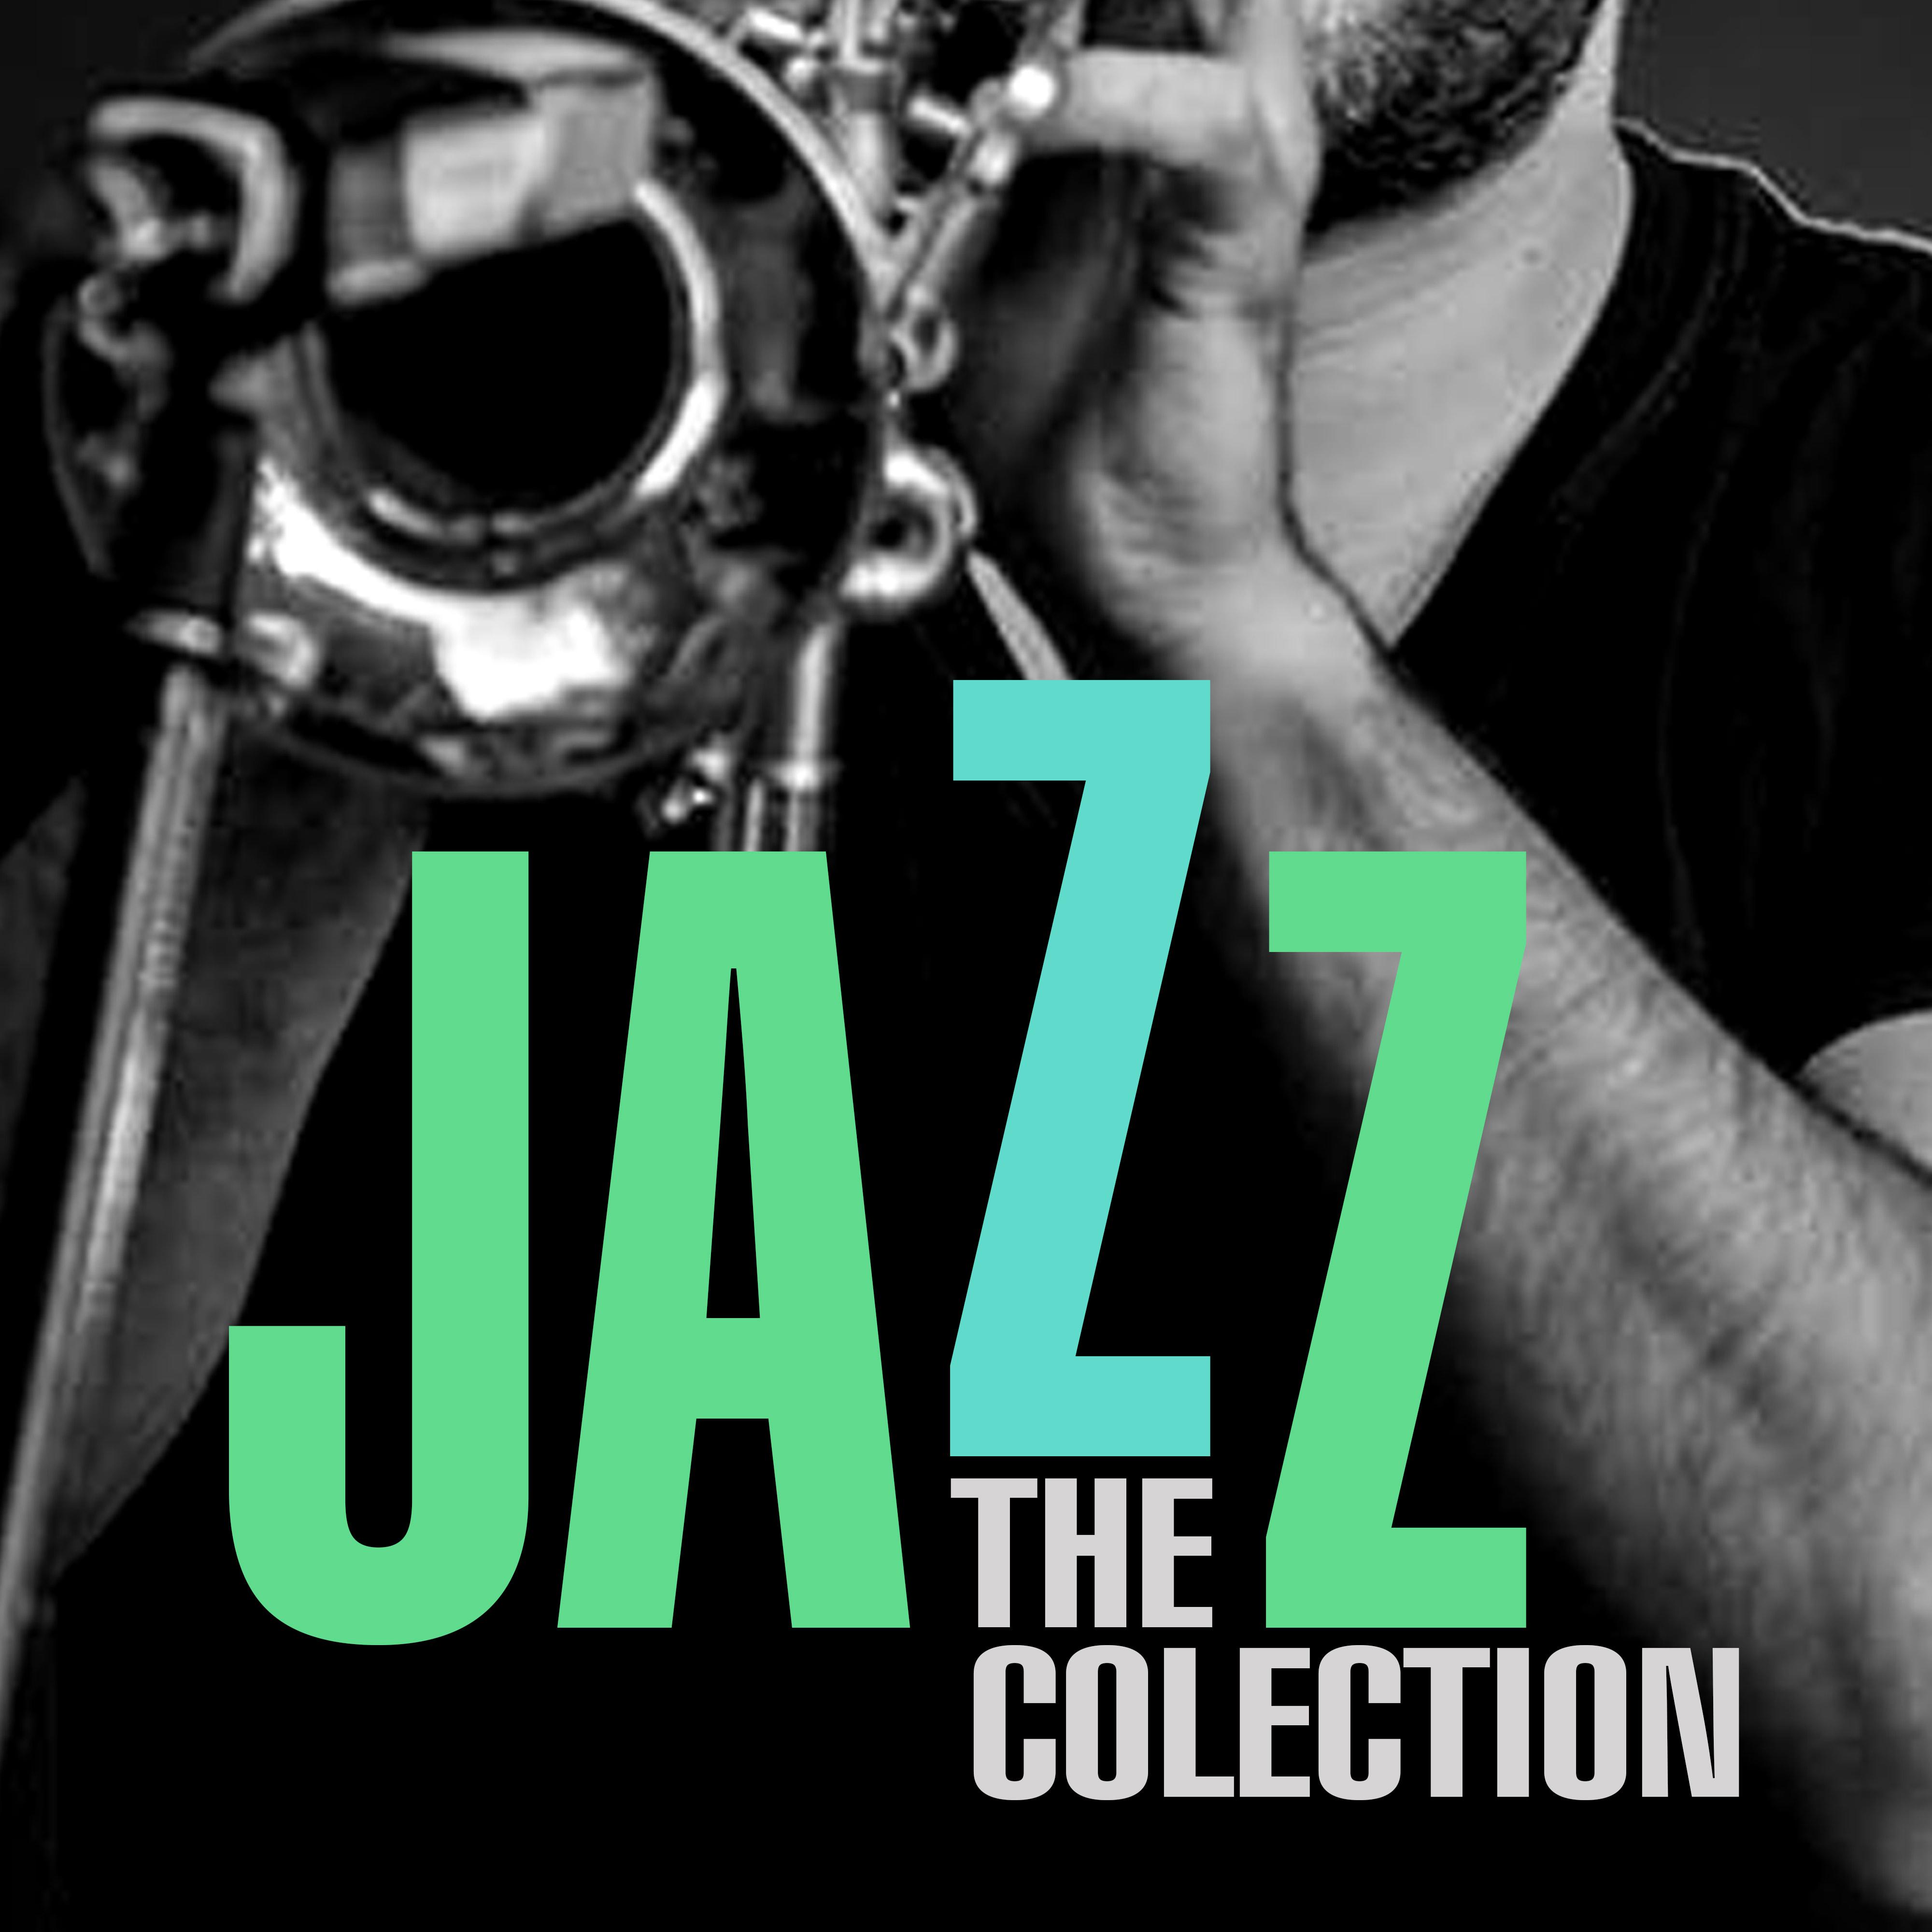 Jazz - The Collection